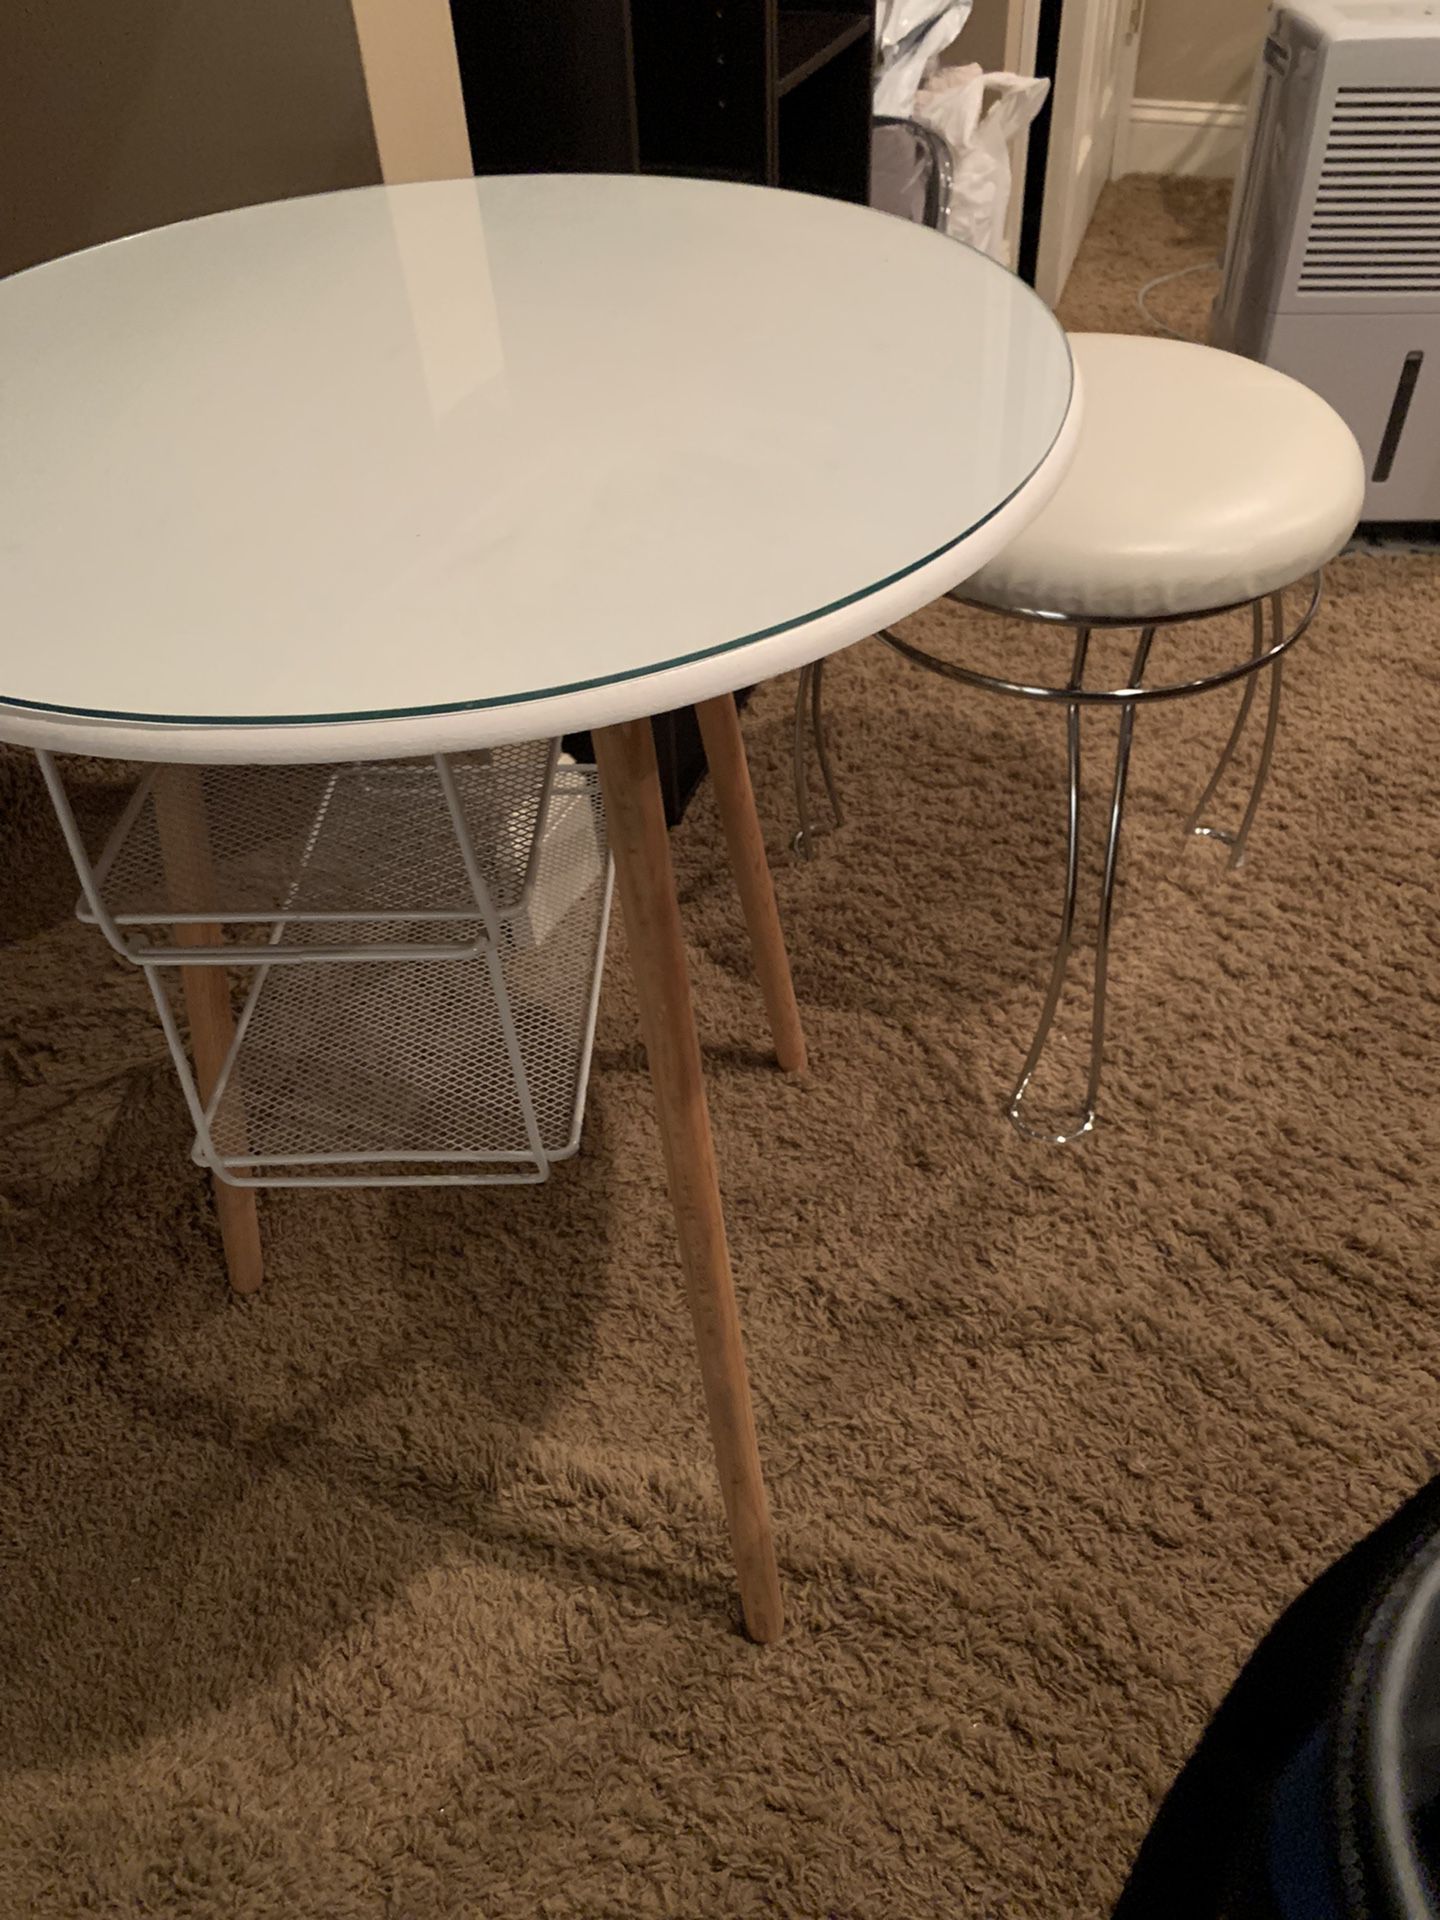 DIY small Vanity Table And Stool